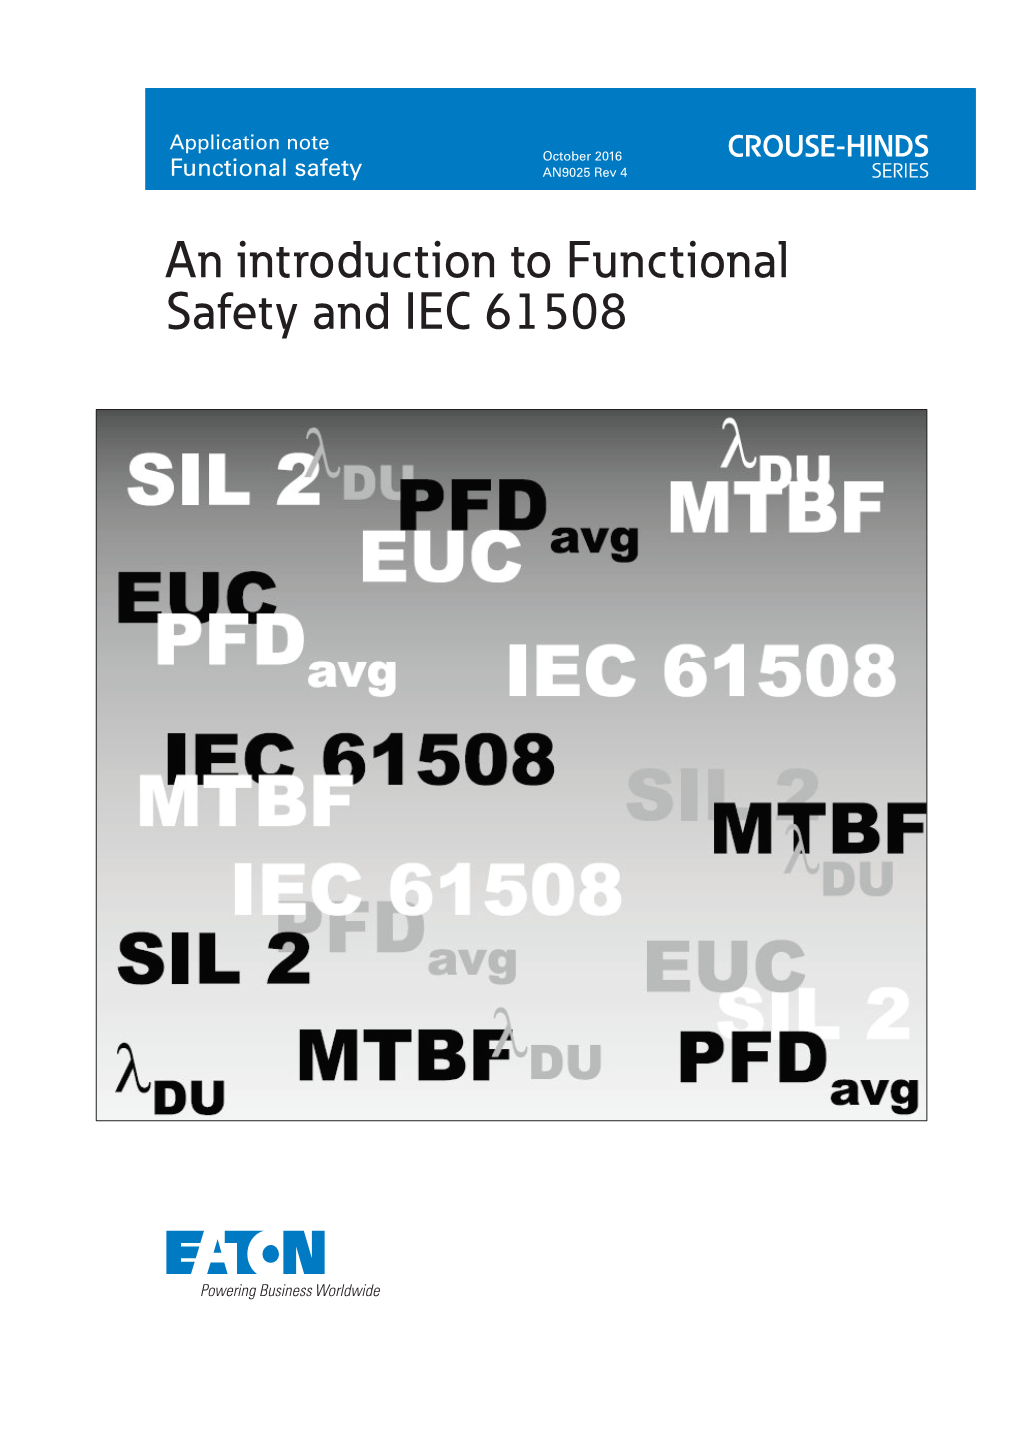 An Introduction to Functional Safety and IEC 61508 Contents Page